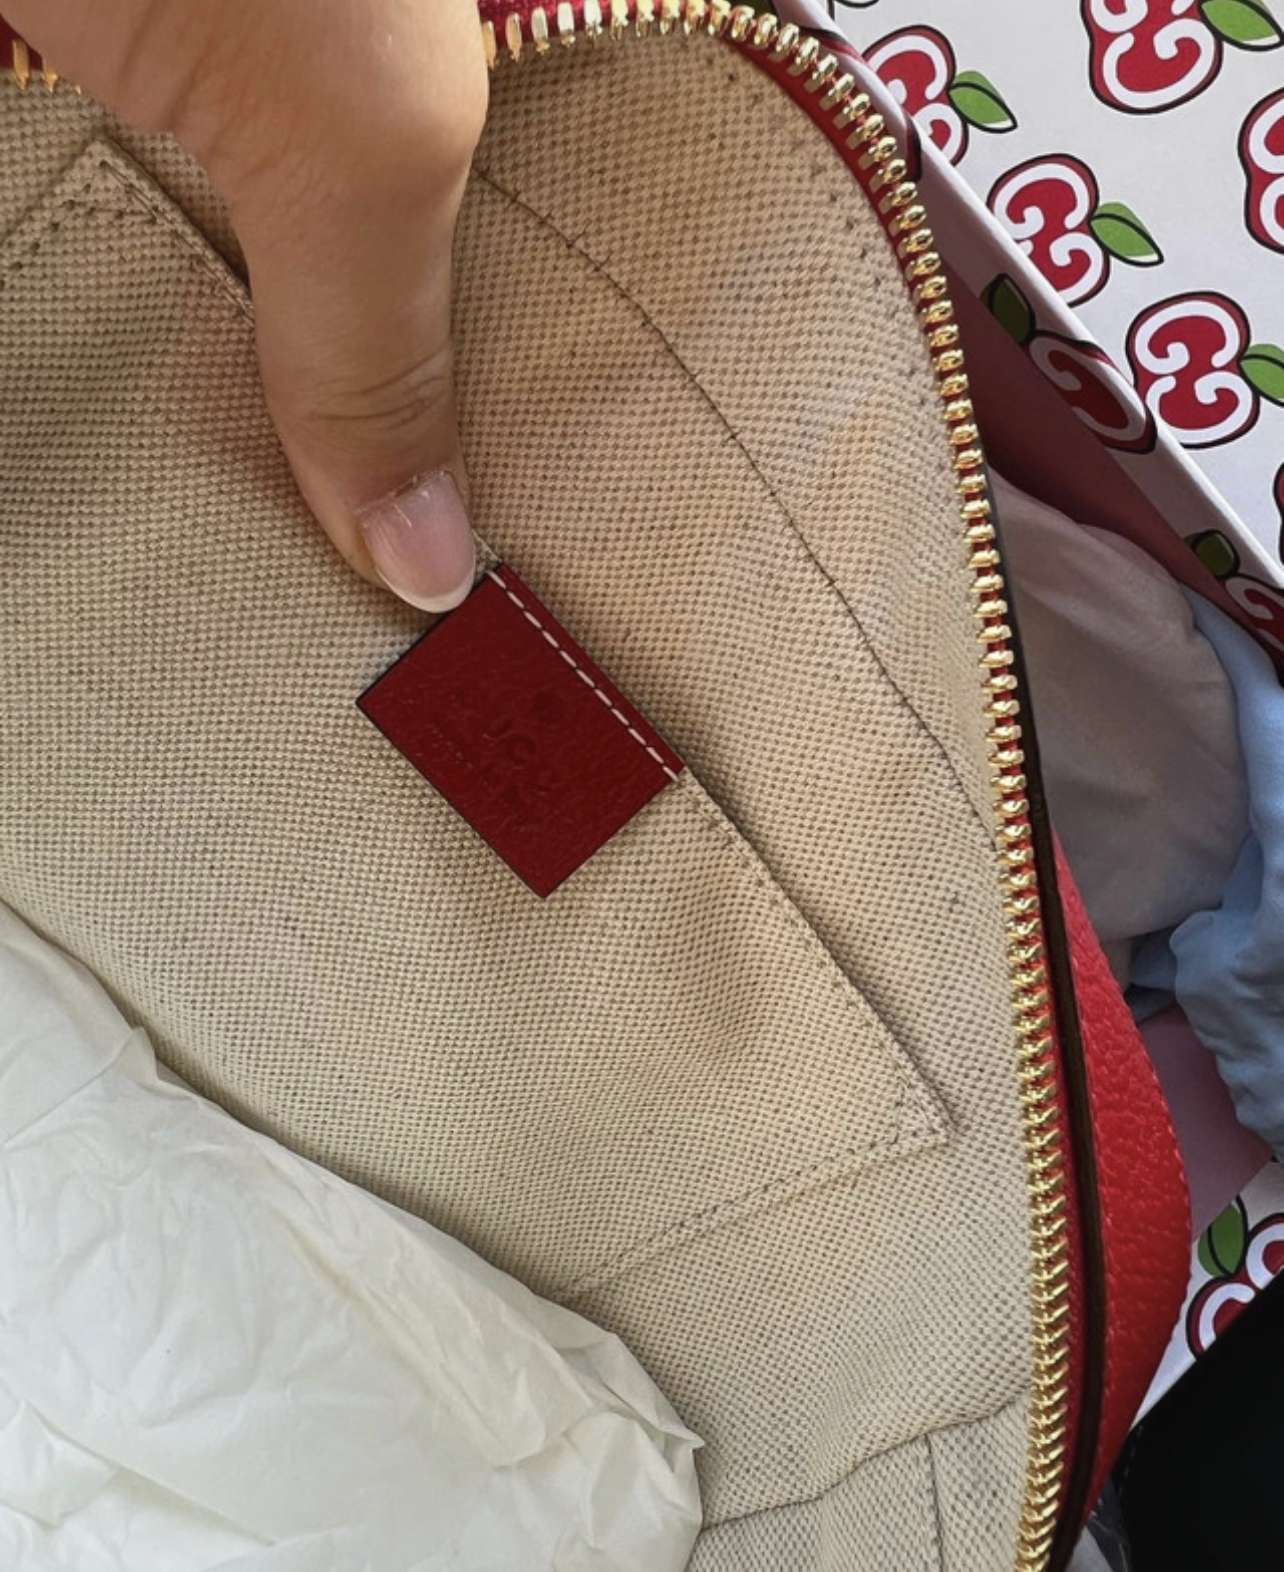 Gucci Apple red leather bag